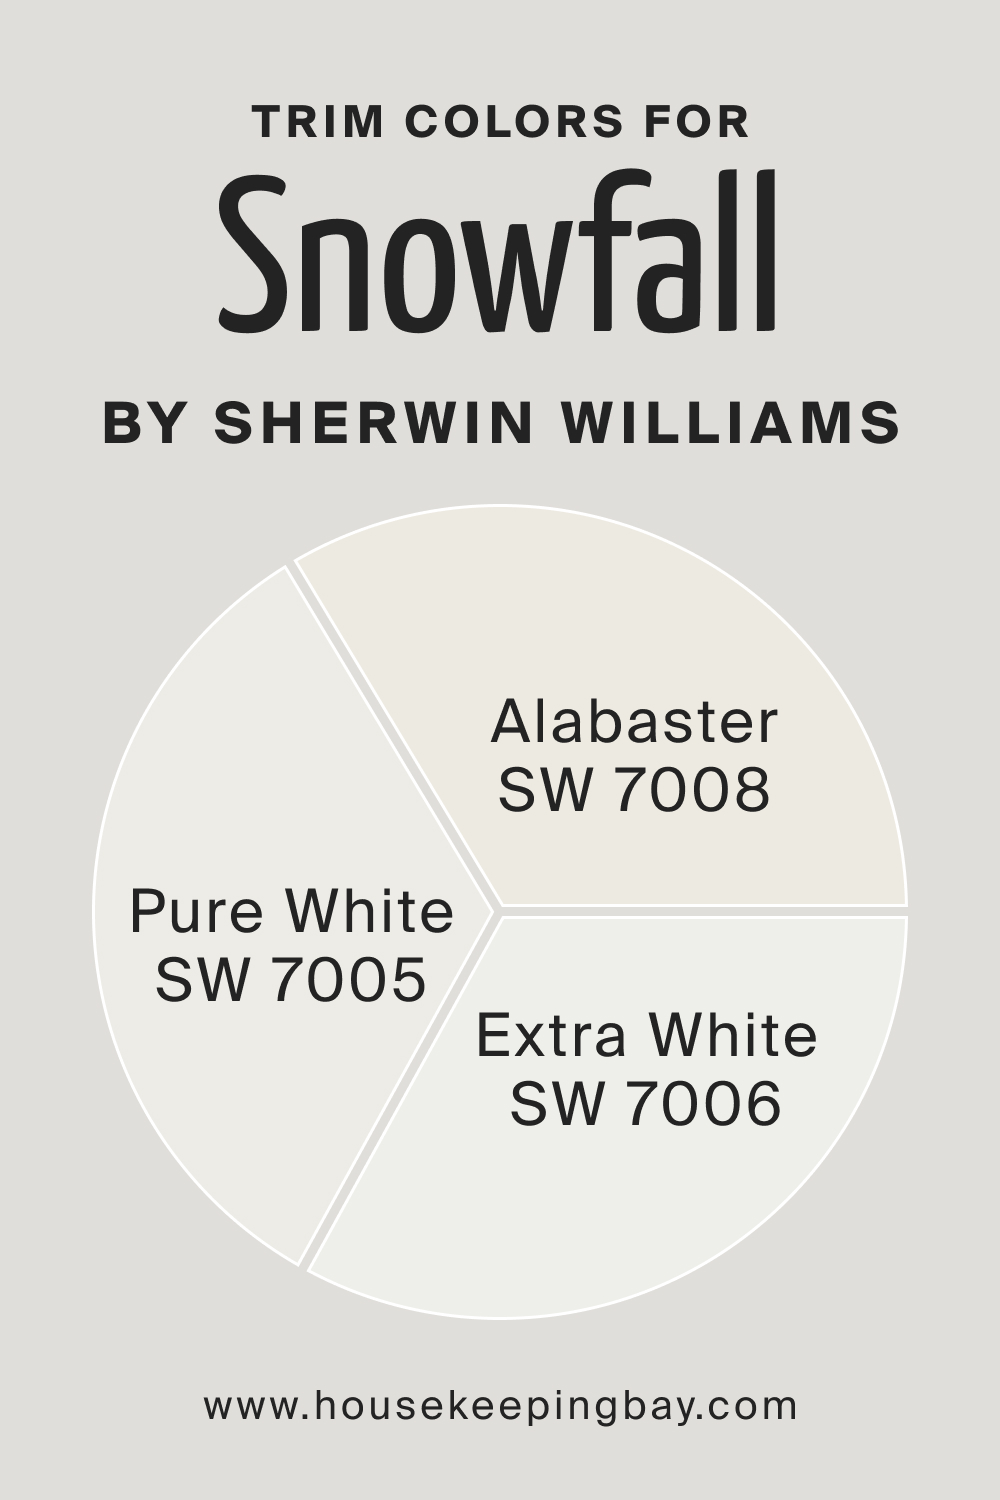 Trim Color of Snowfall by Sherwin Williams